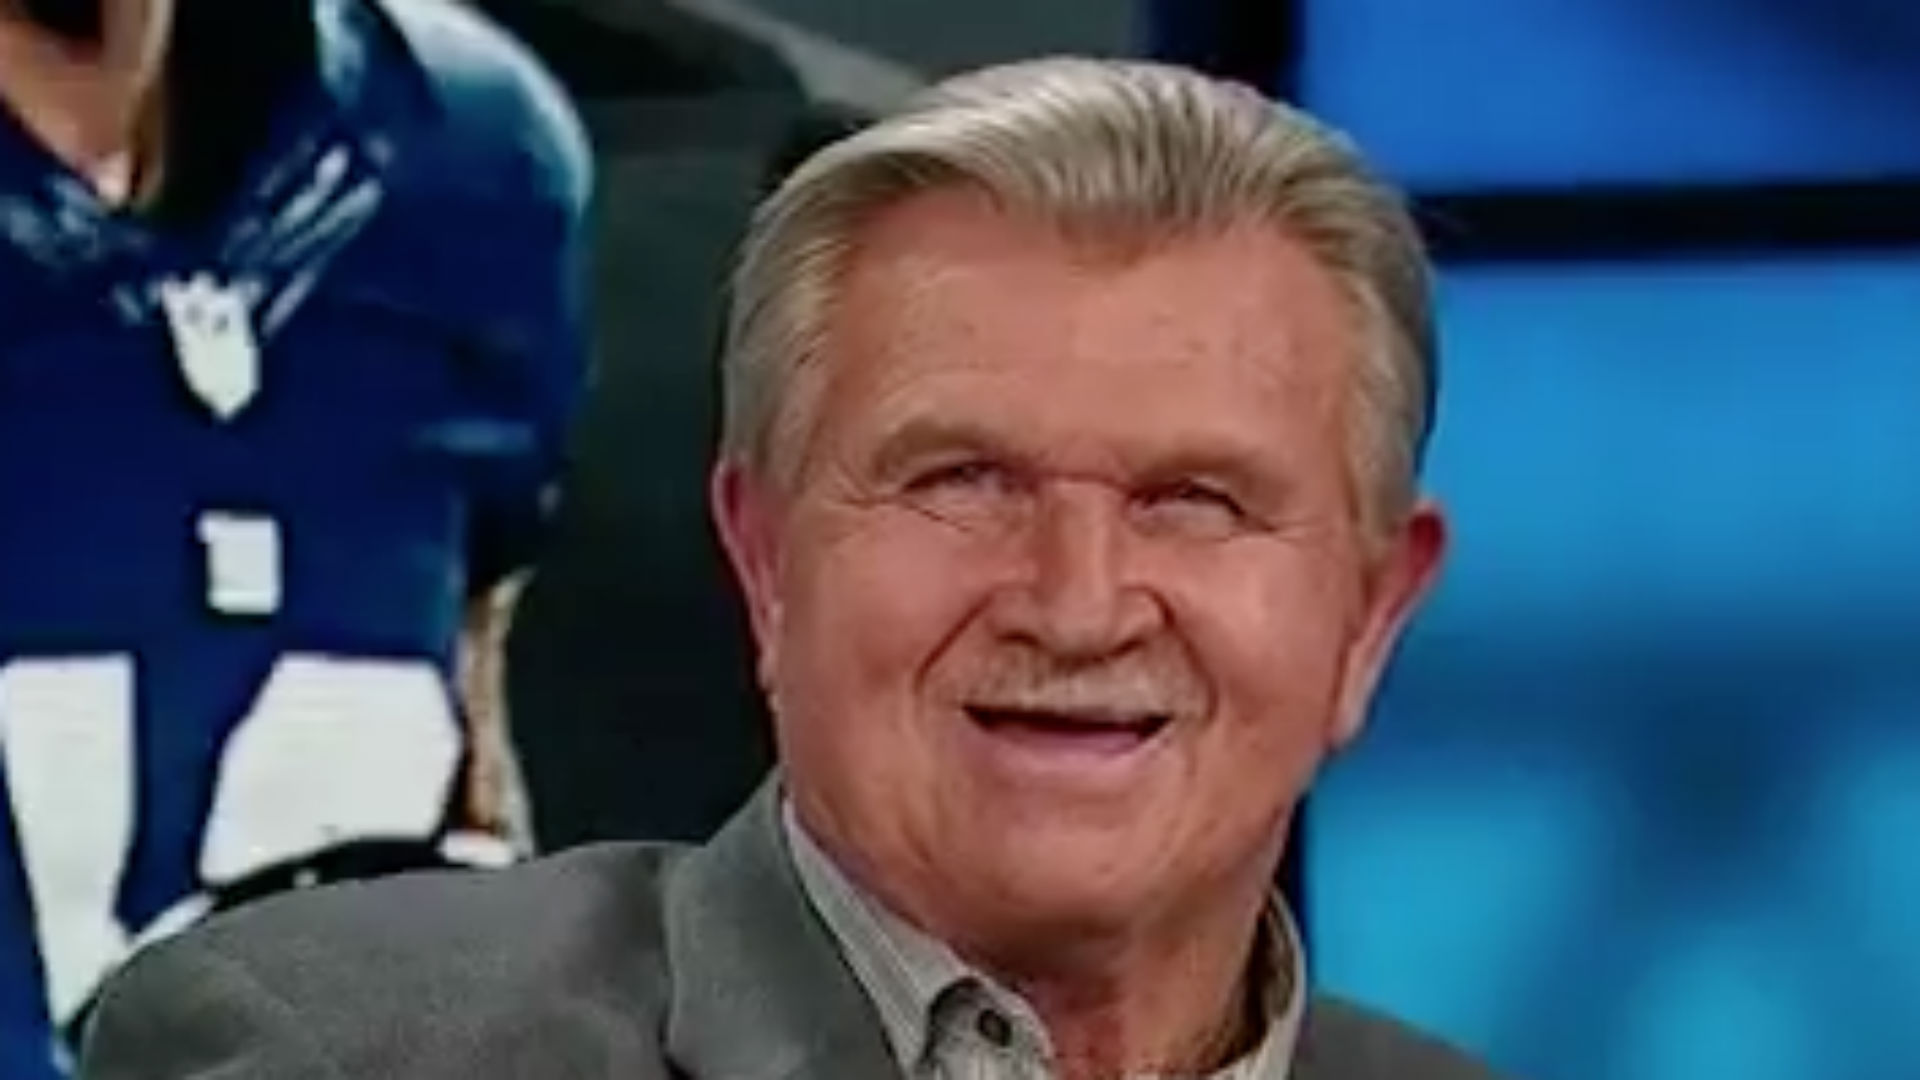 Mike Ditka Net Worth